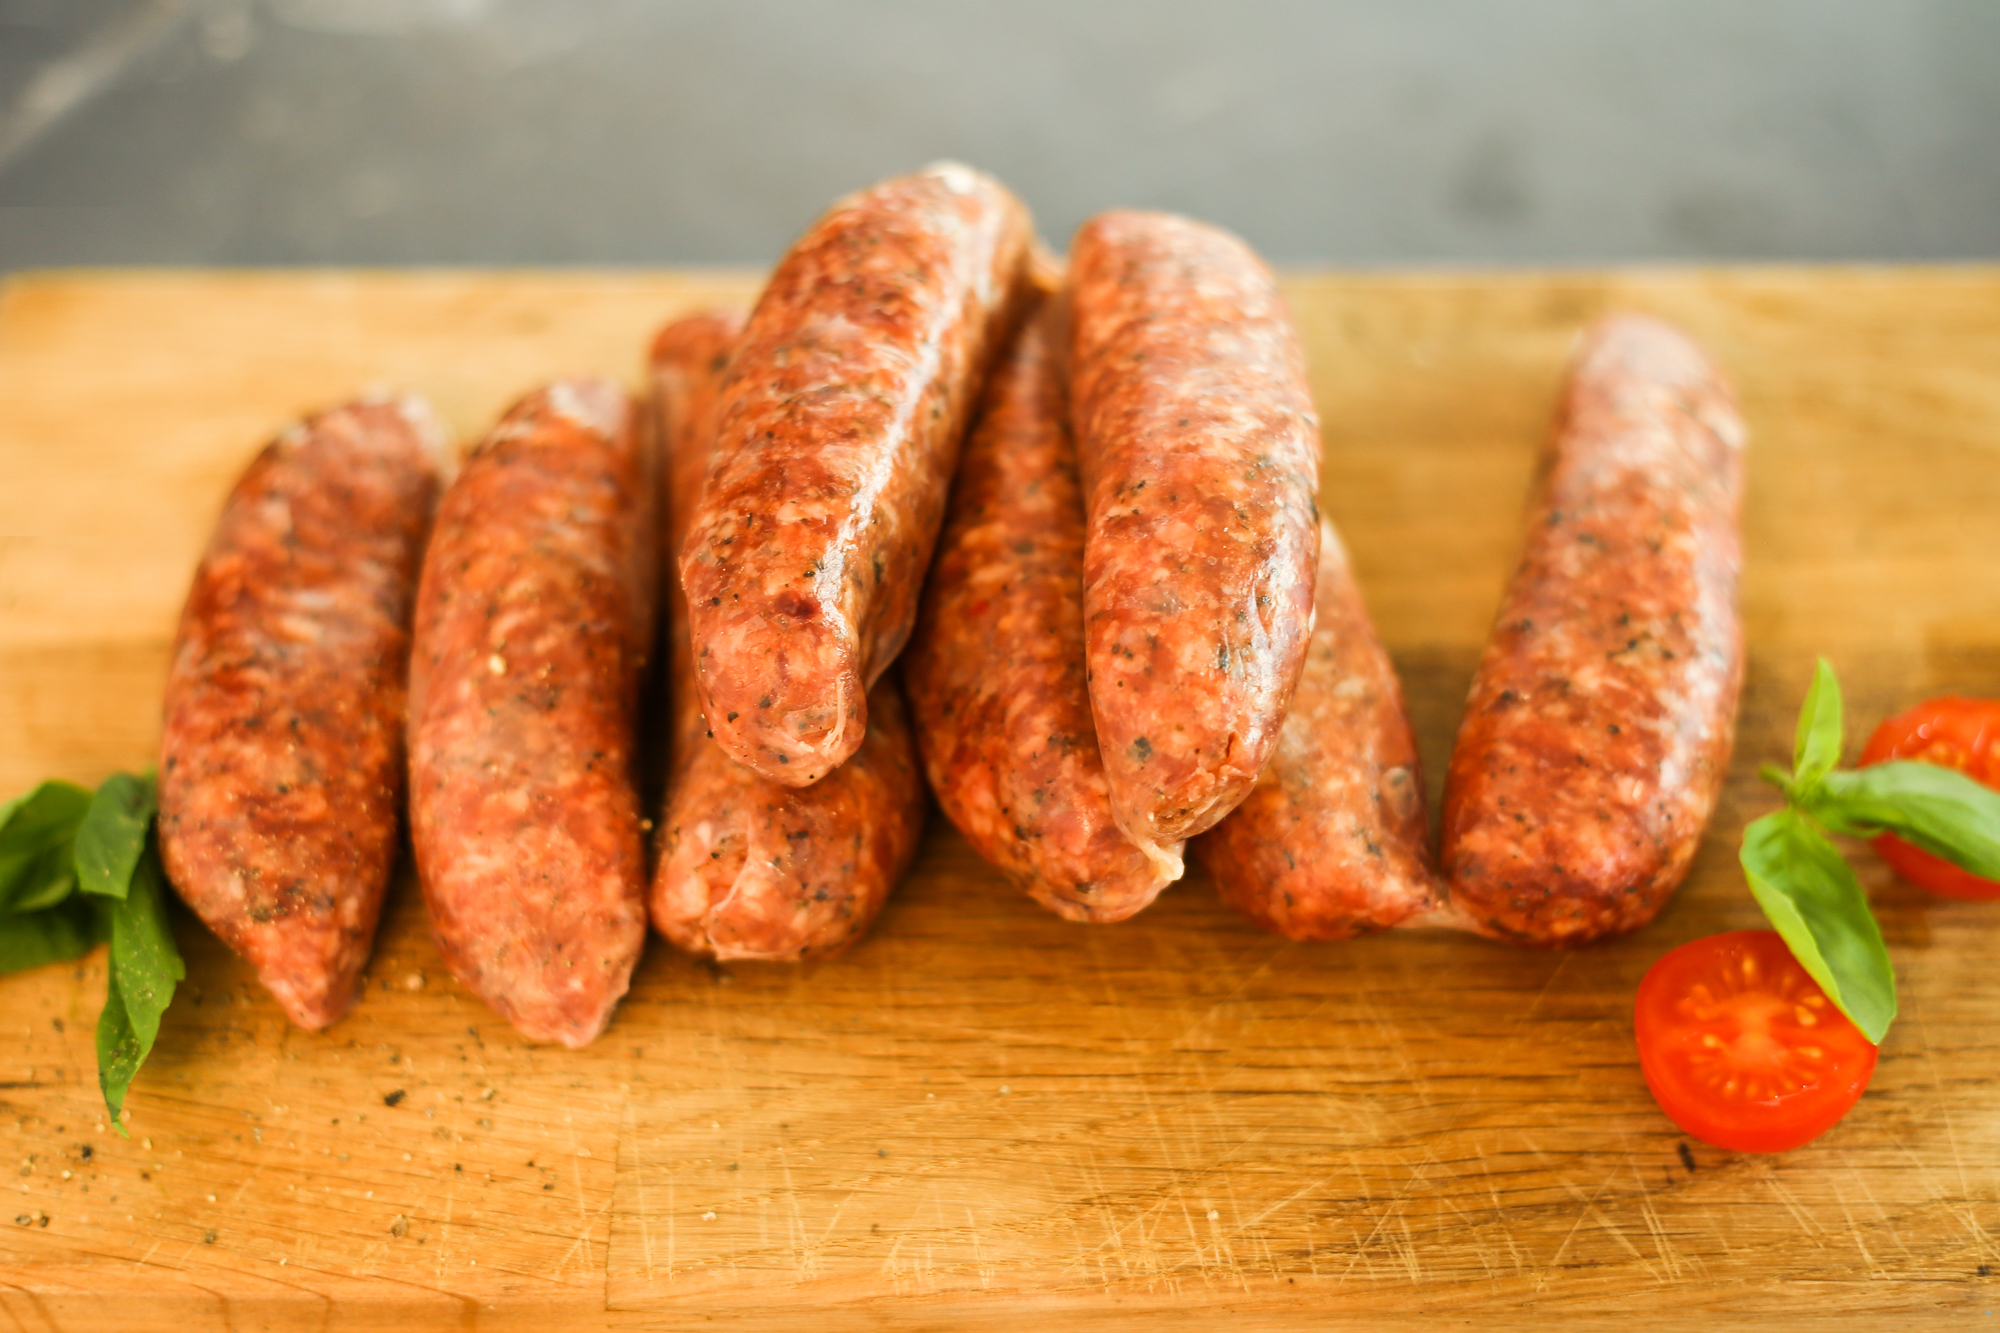 Pork tomato and basil sausages (pack of 8)